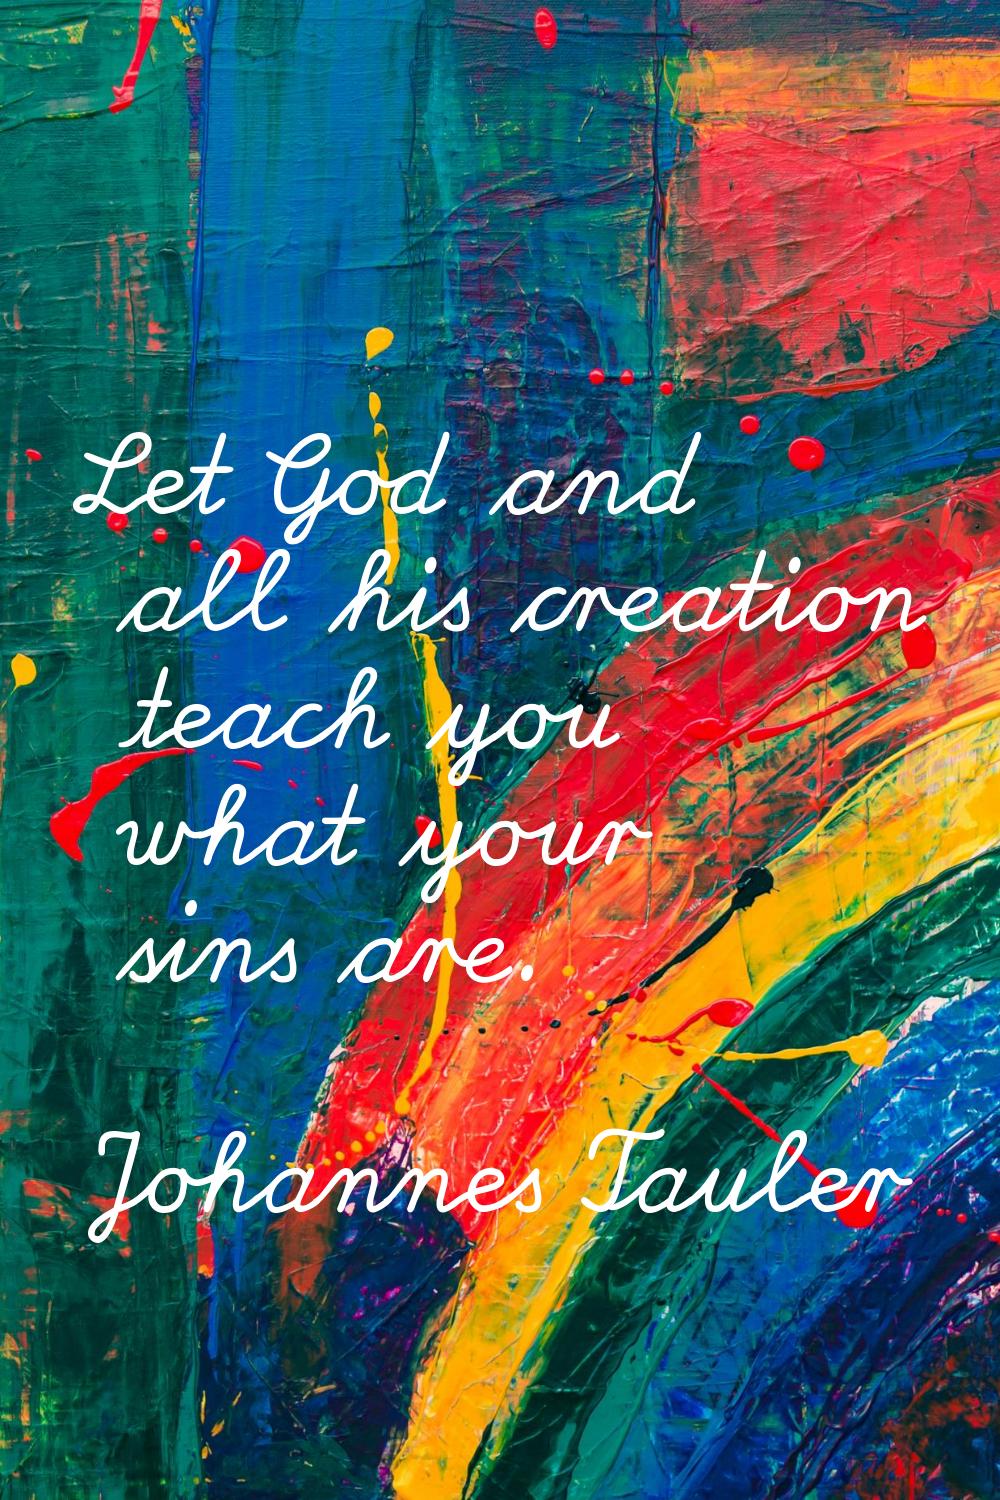 Let God and all his creation teach you what your sins are.